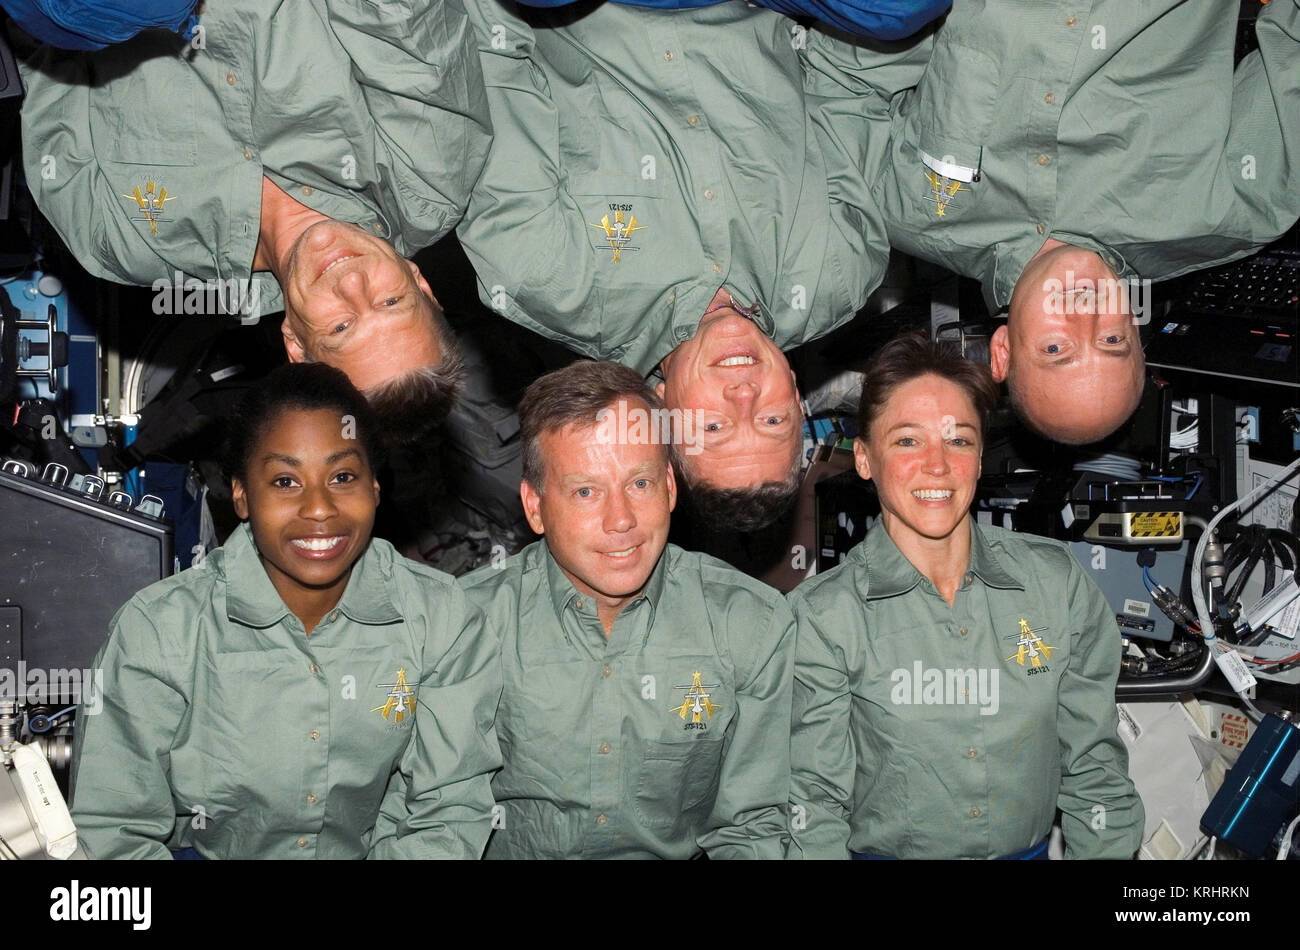 NASA Space Shuttle Discovery International Space Station STS-121 mission prime crew members (bottom, L-R) American astronauts Stephanie Wilson, Steven Lindsey, Lisa Nowak (top, L-R) Piers Sellers, Michael Fossum and Mark Kelly gather for a group photo in the ISS Destiny Laboratory July 9, 2006 in Earth orbit. Stock Photo